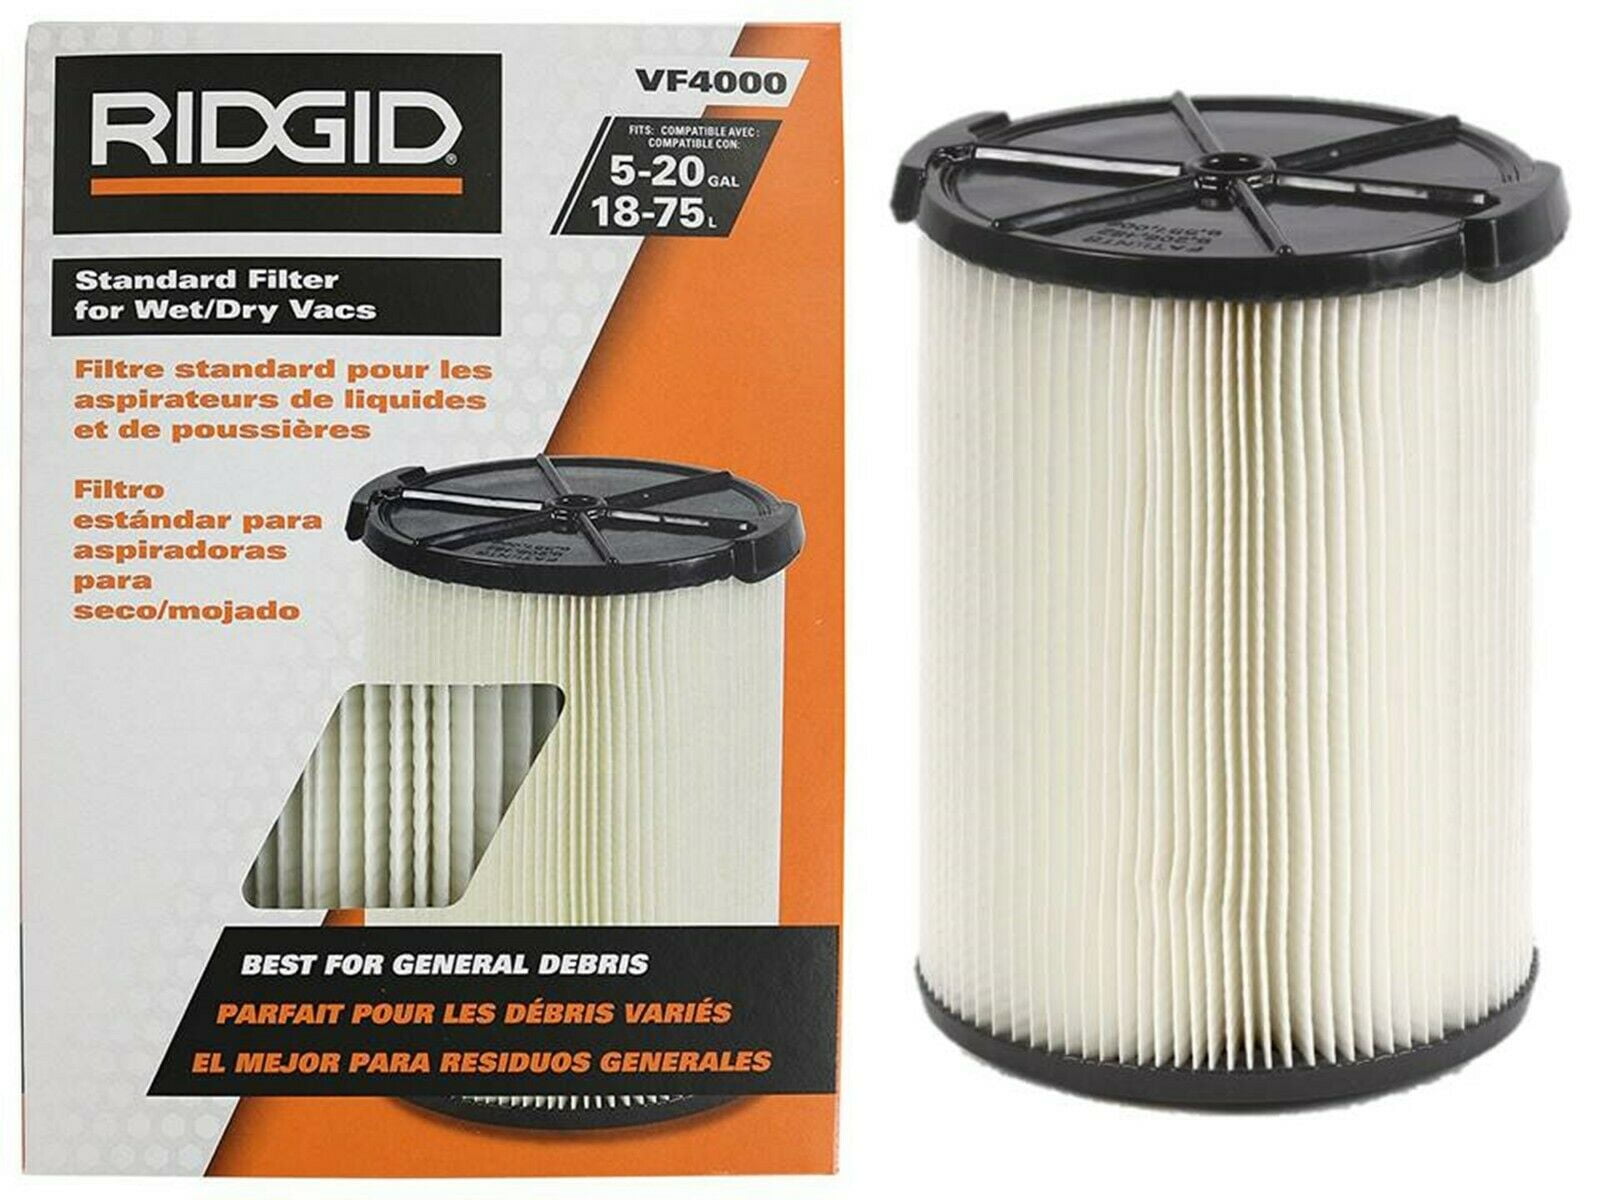 Housmile Replacement Filter Ridgid VF4000 Vacs Compatible with Ridgid 5-20 